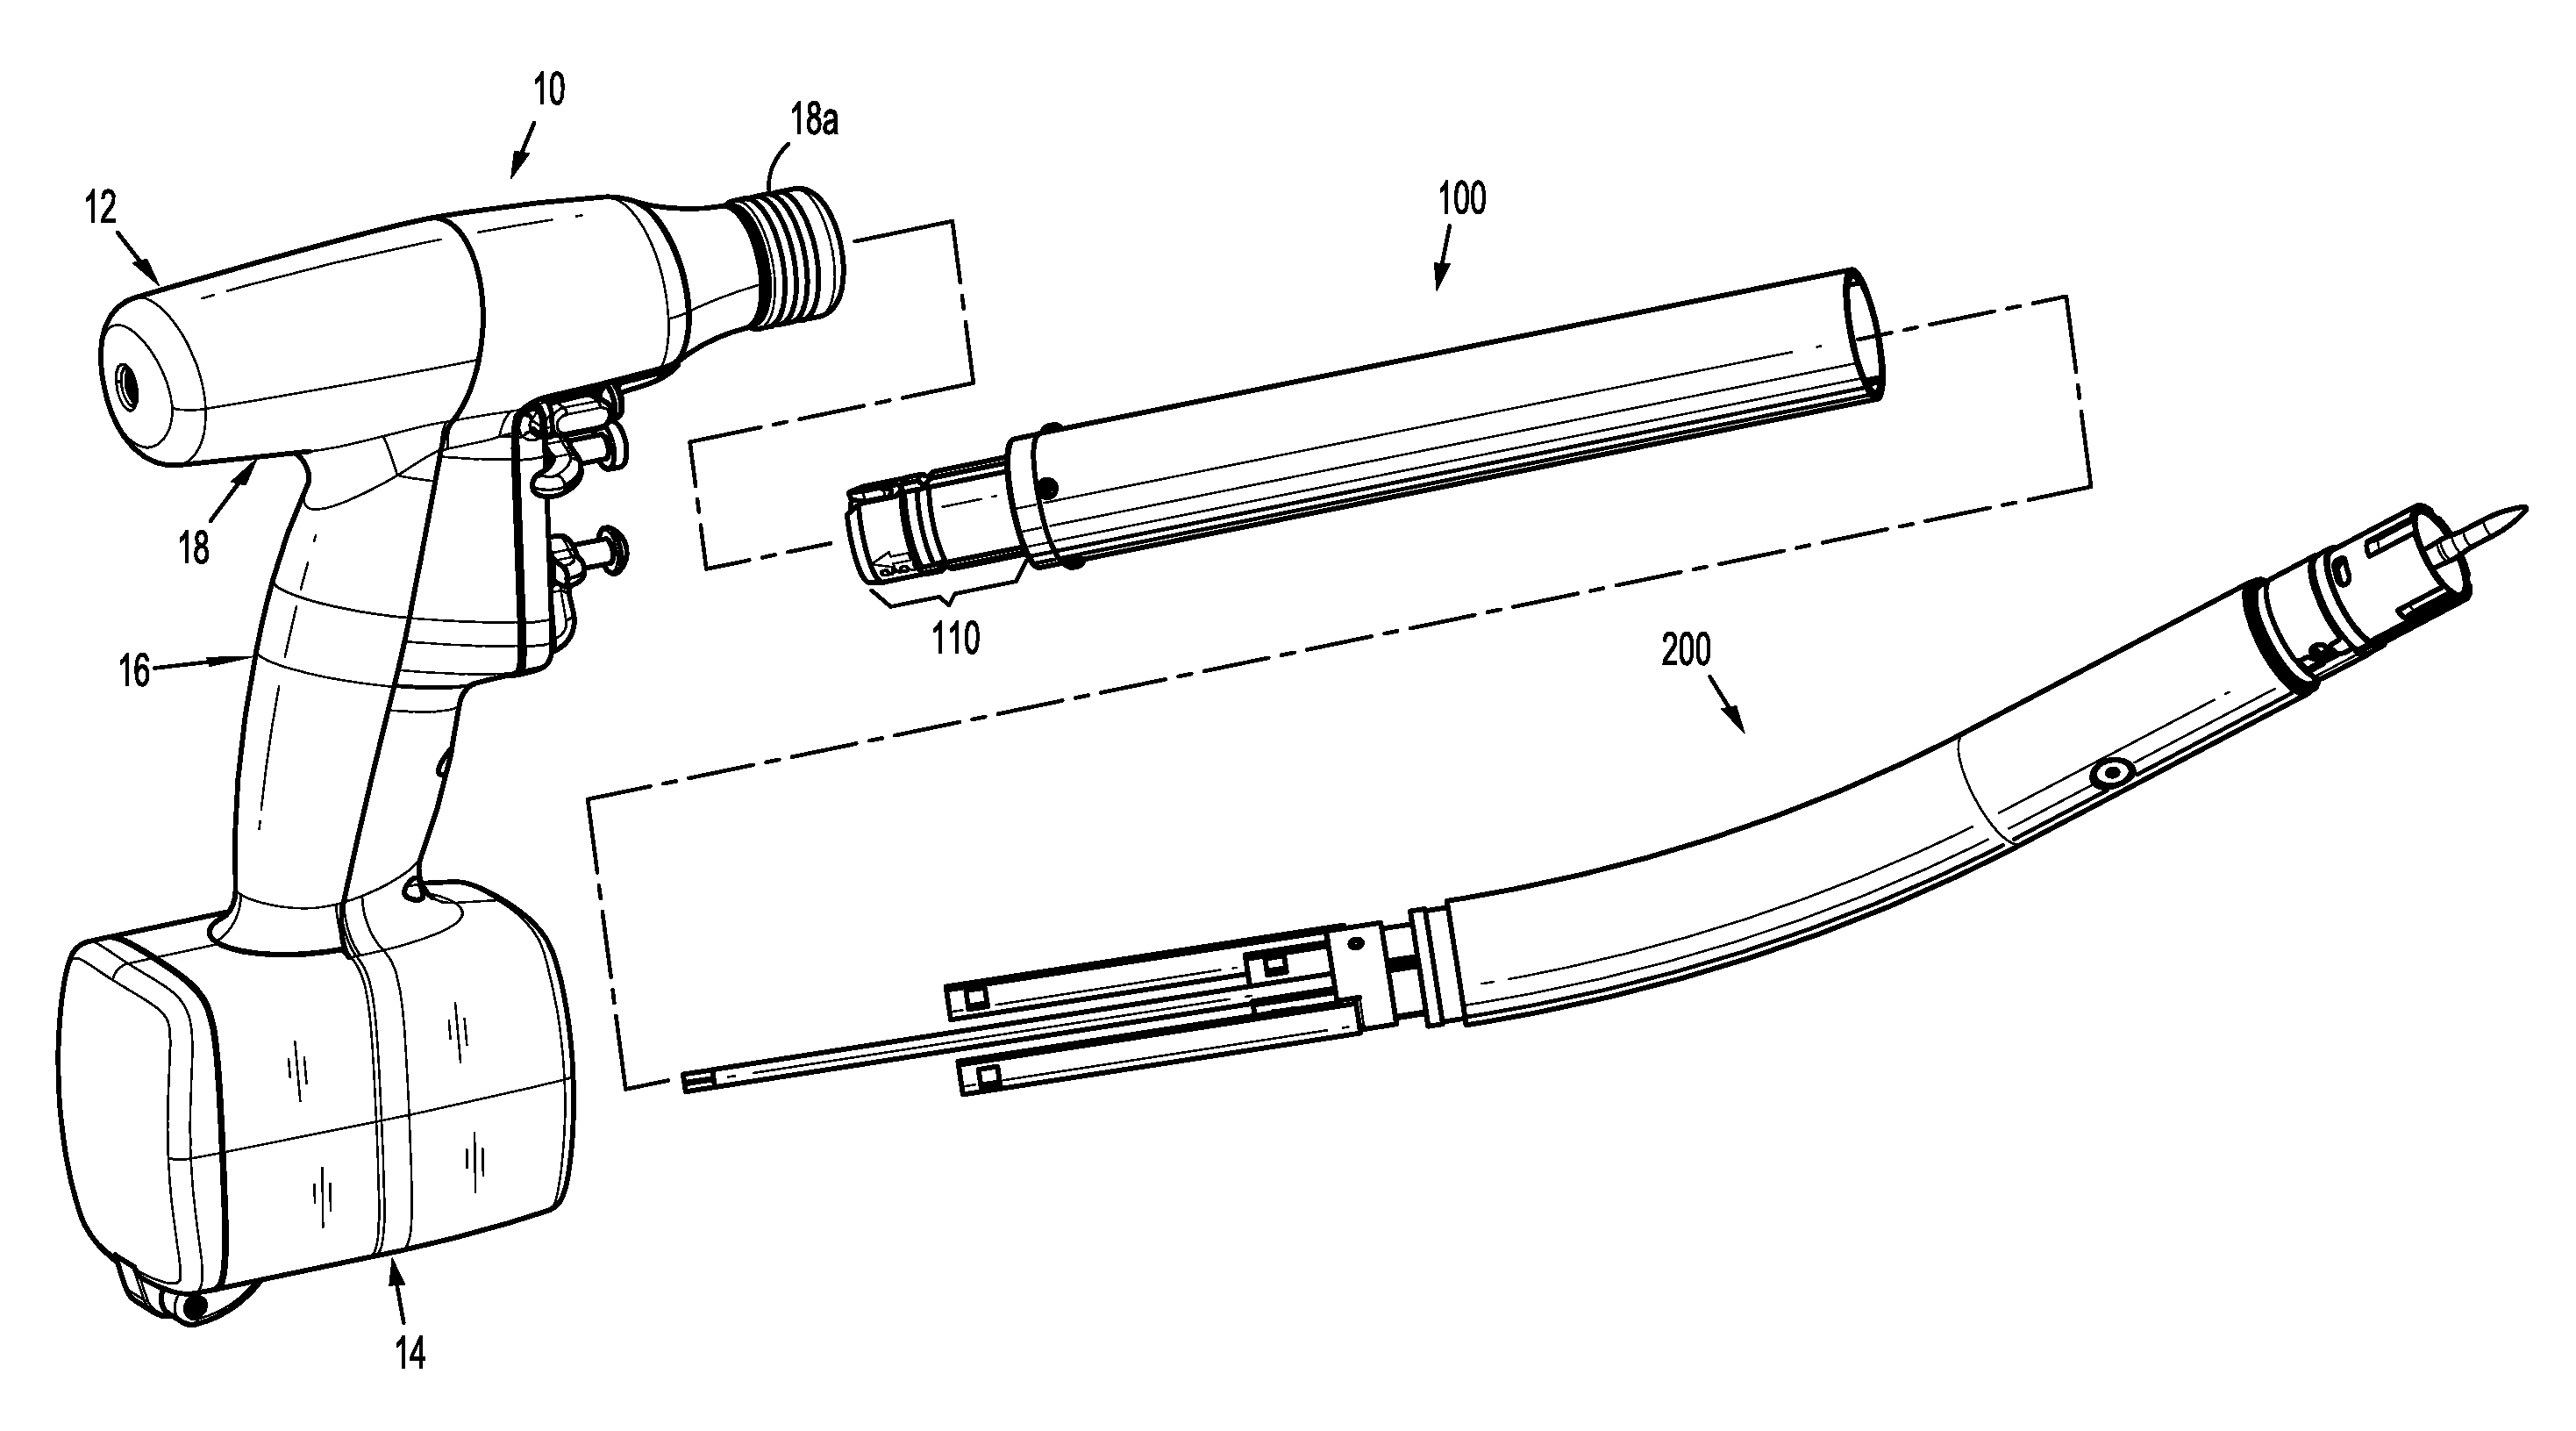 Adapter, extension, and connector assemblies for surgical devices